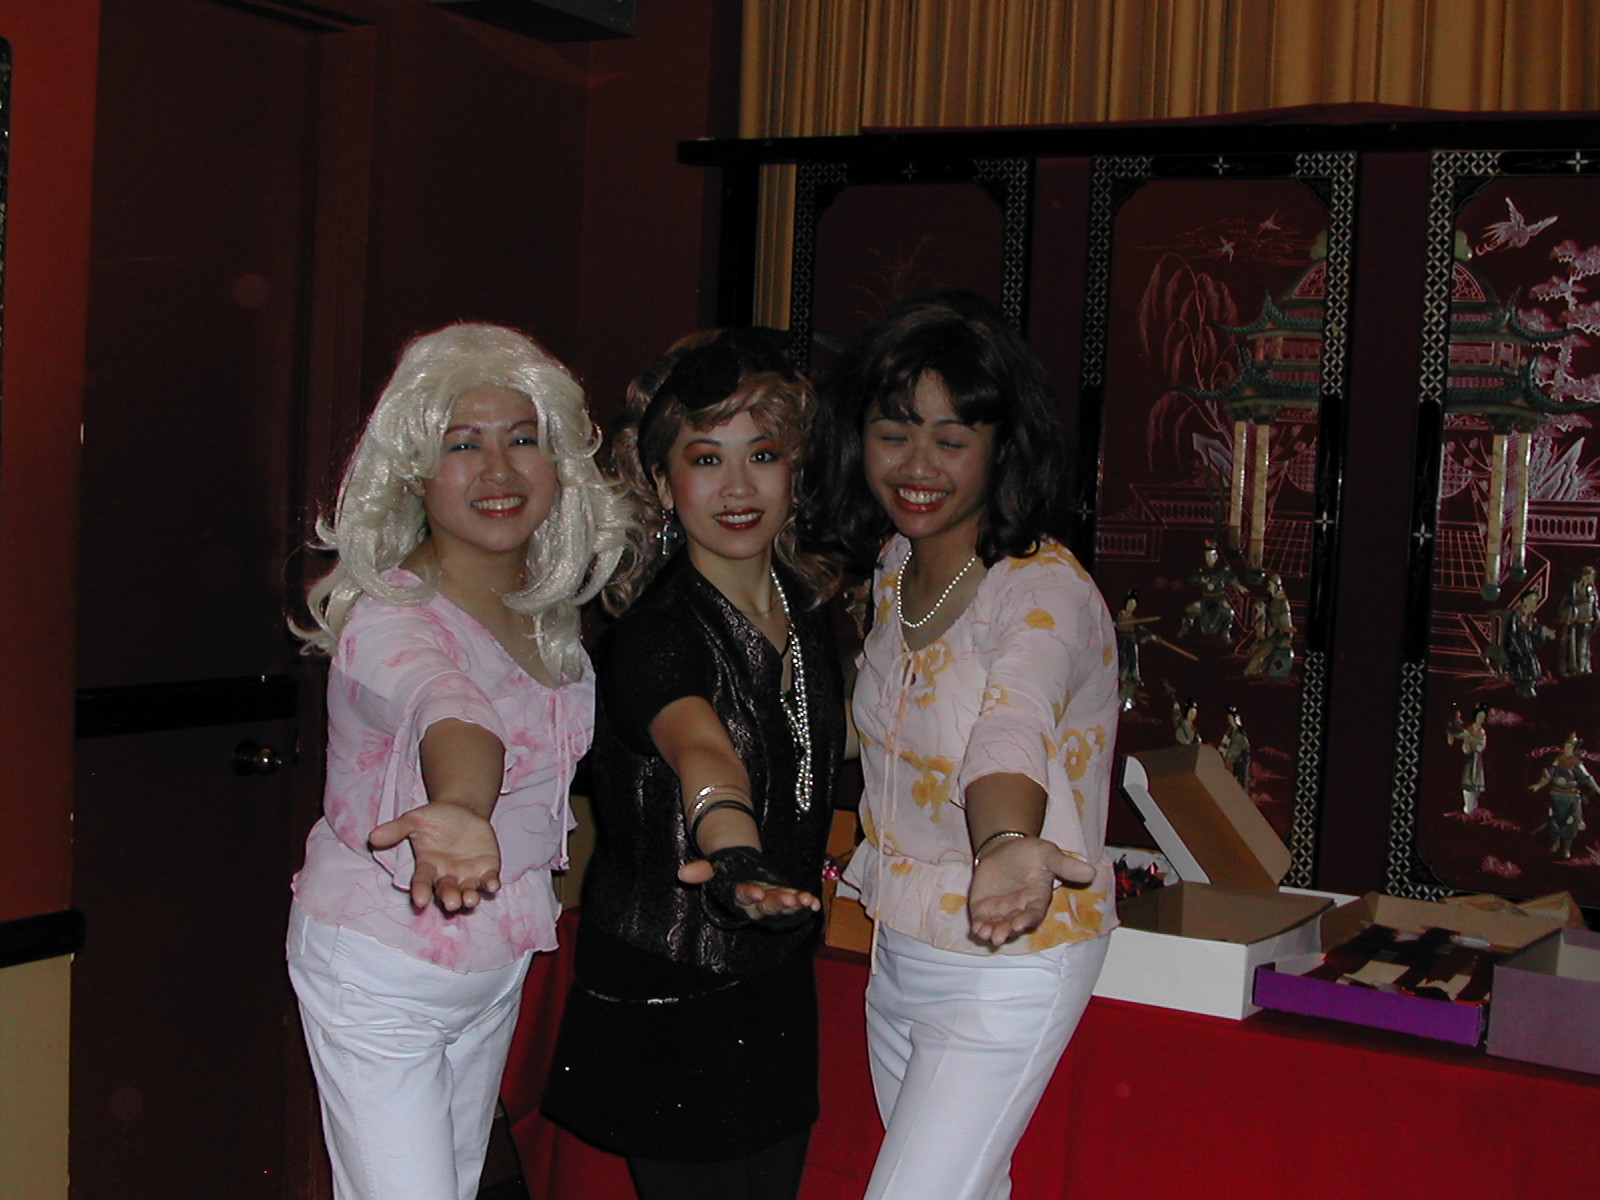 Juli Jung as Madonna (mid) flanked by ABBA